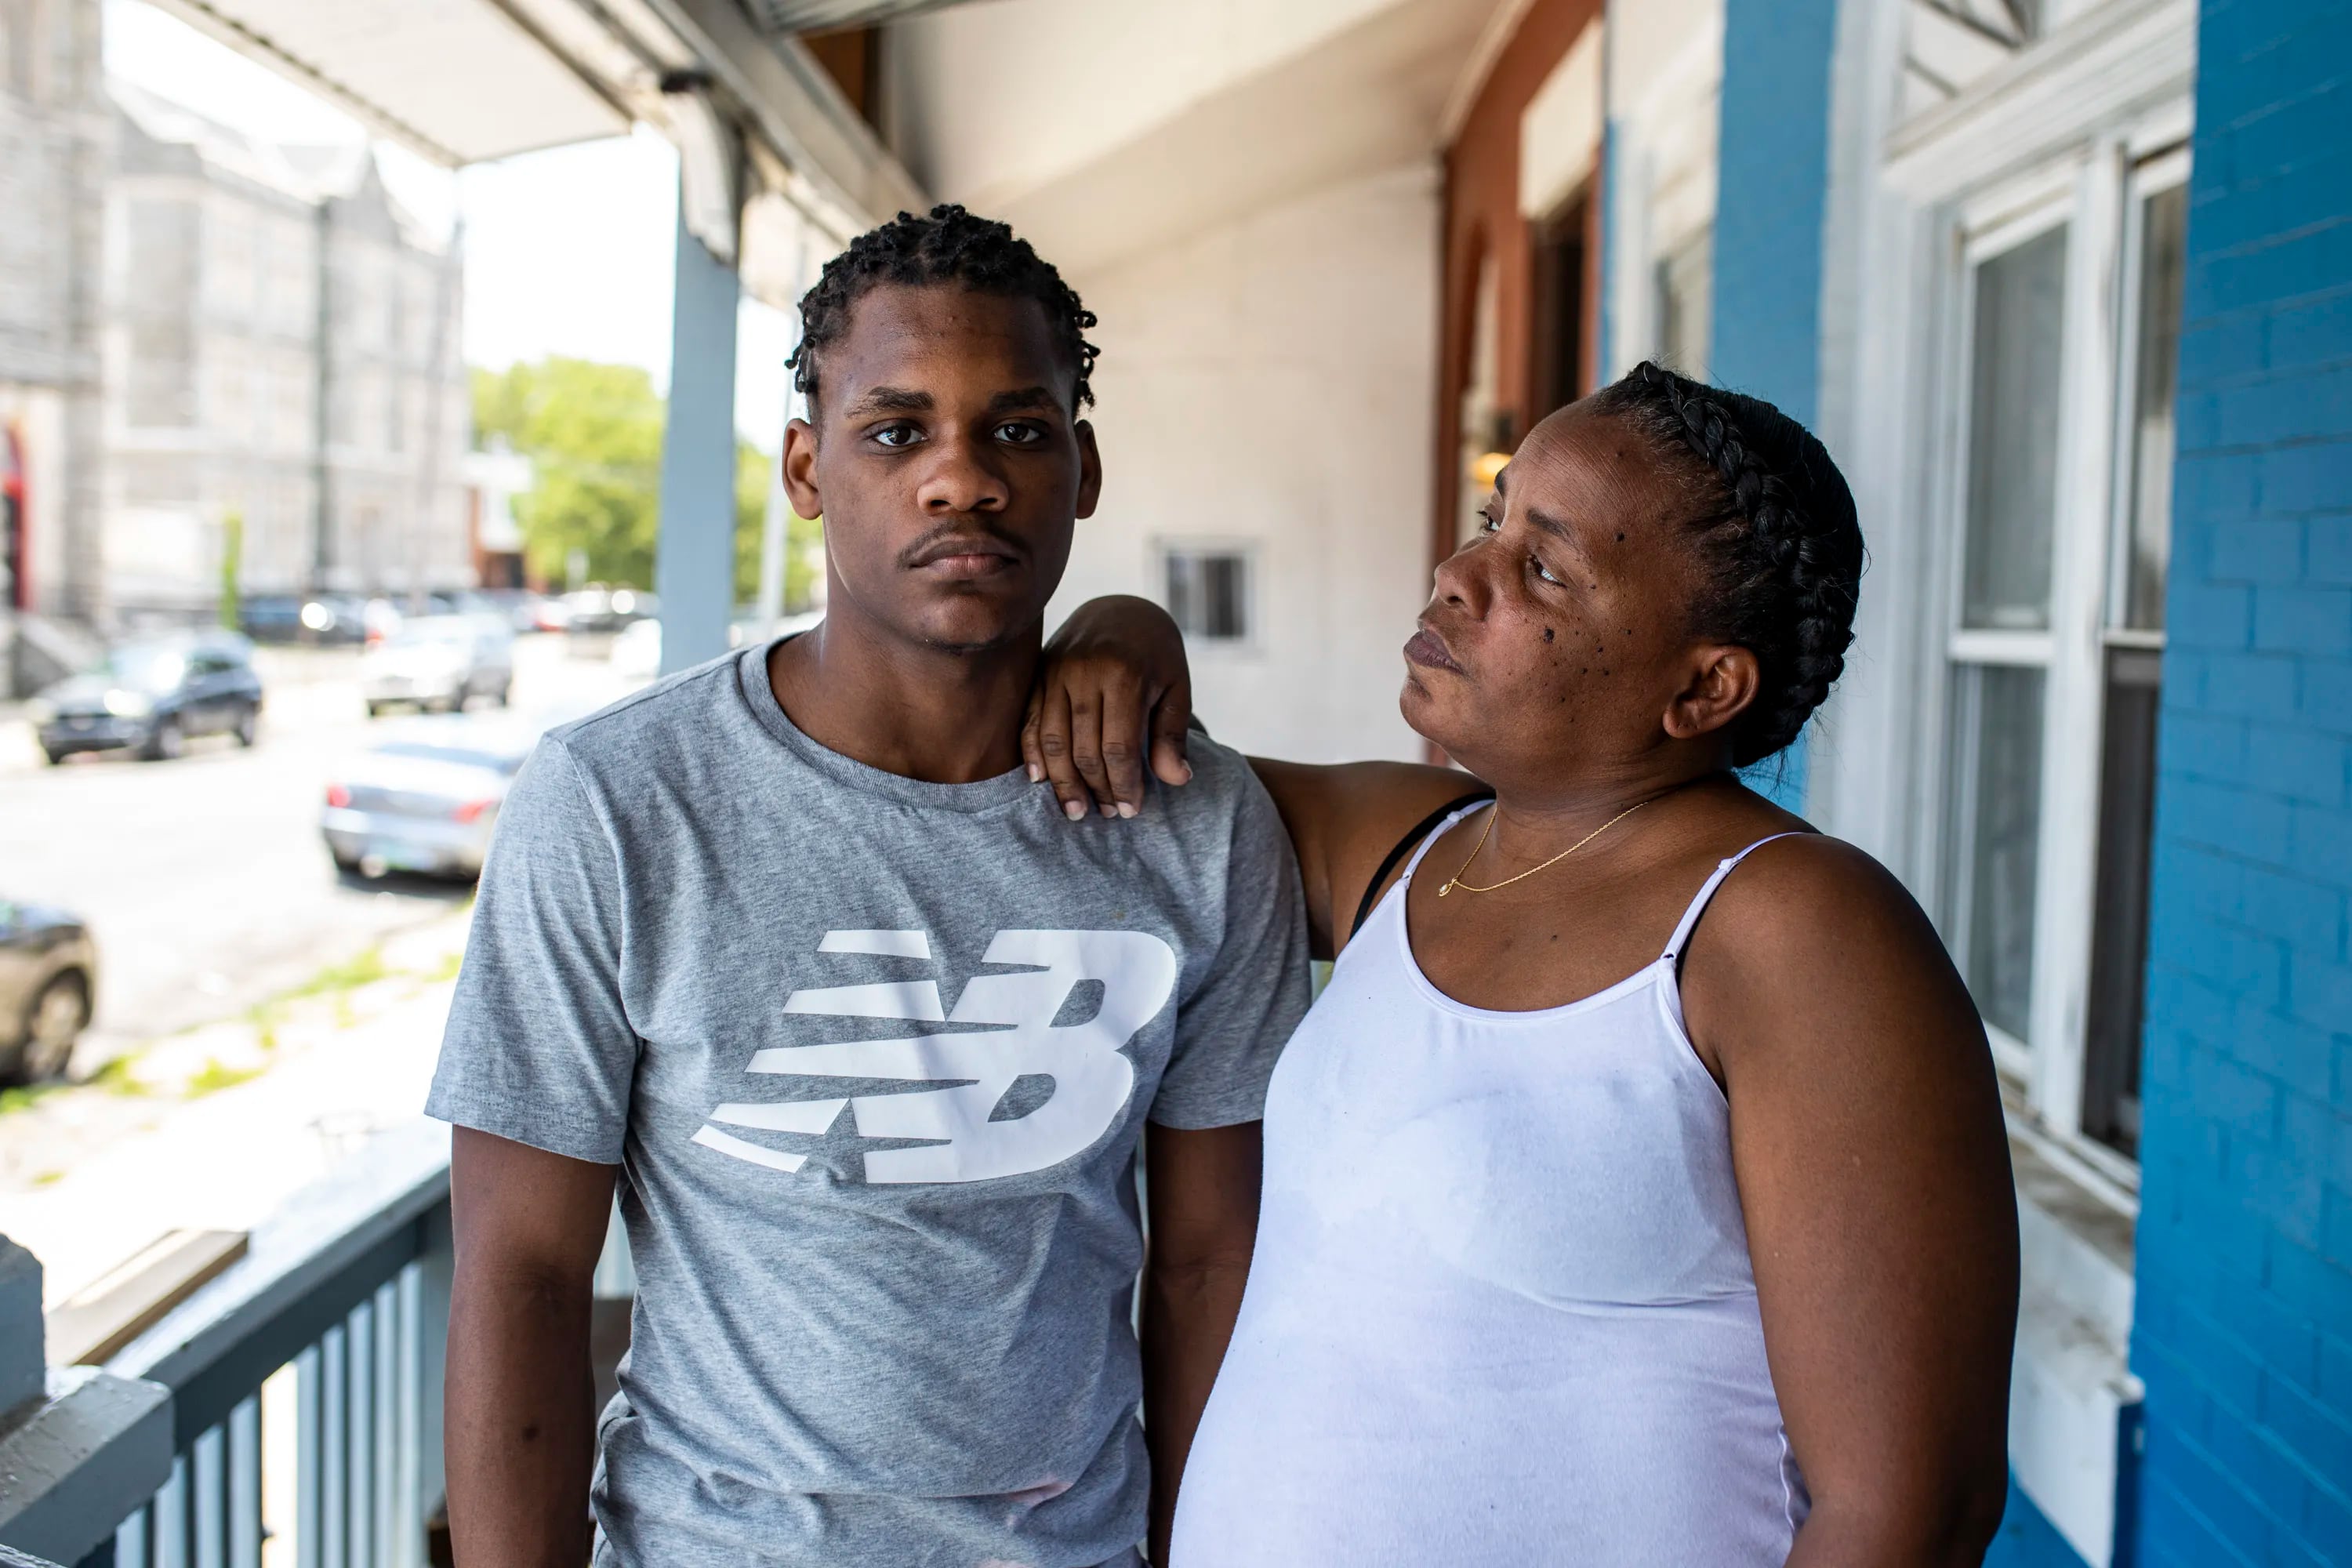 Daquan Carter, 17, and his mom Tanja Carter, 52, of West Philadelphia say staff failed to protect him from constant bullying, including physical assaults and the daily theft of his food, at the Juvenile Justice Services Center.